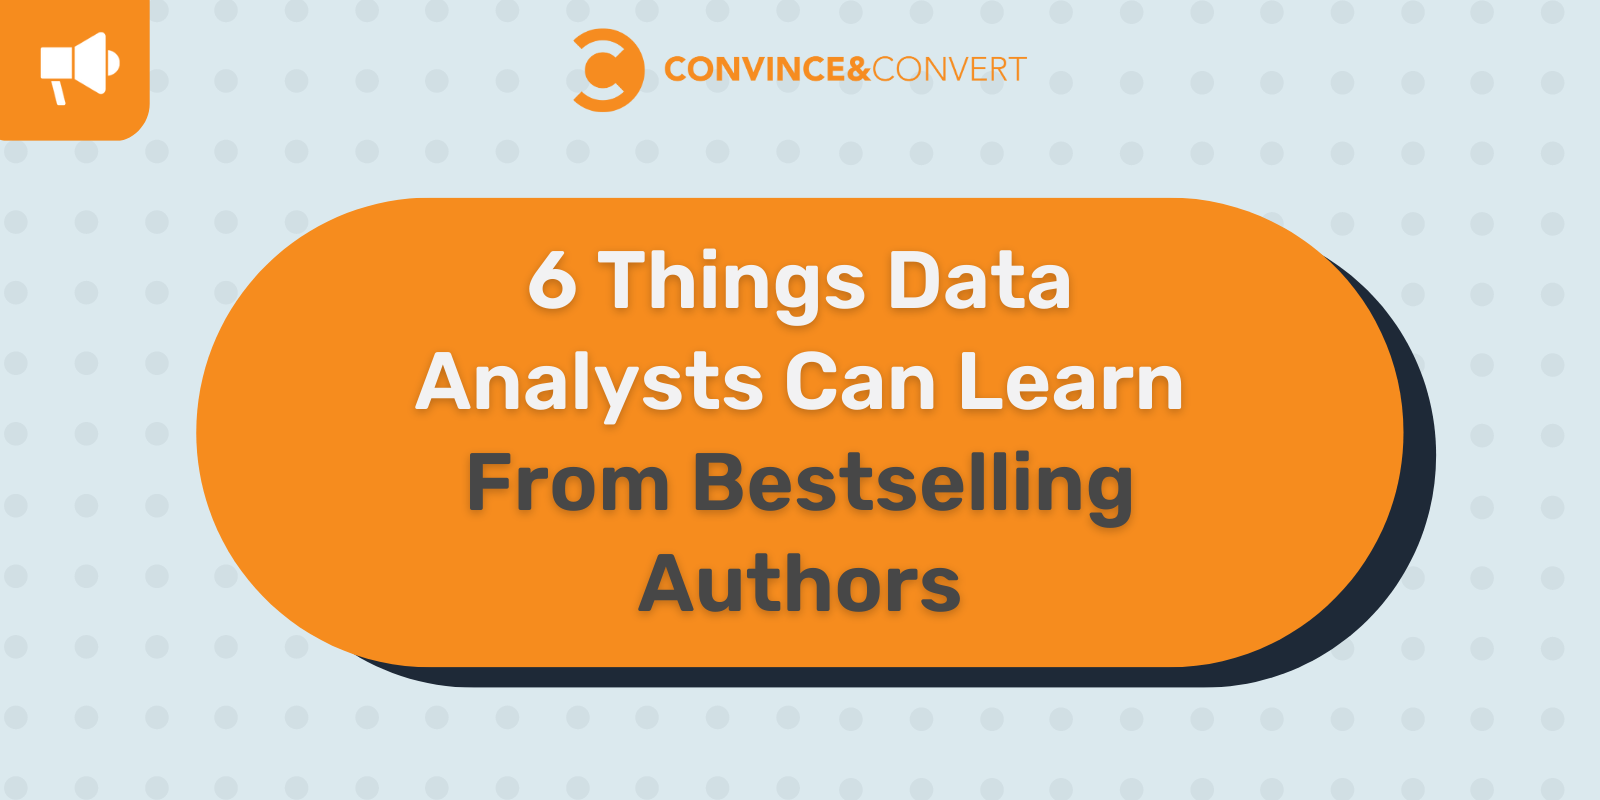 You are currently viewing 6 Things Data Analysts Can Learn From Bestselling Authors